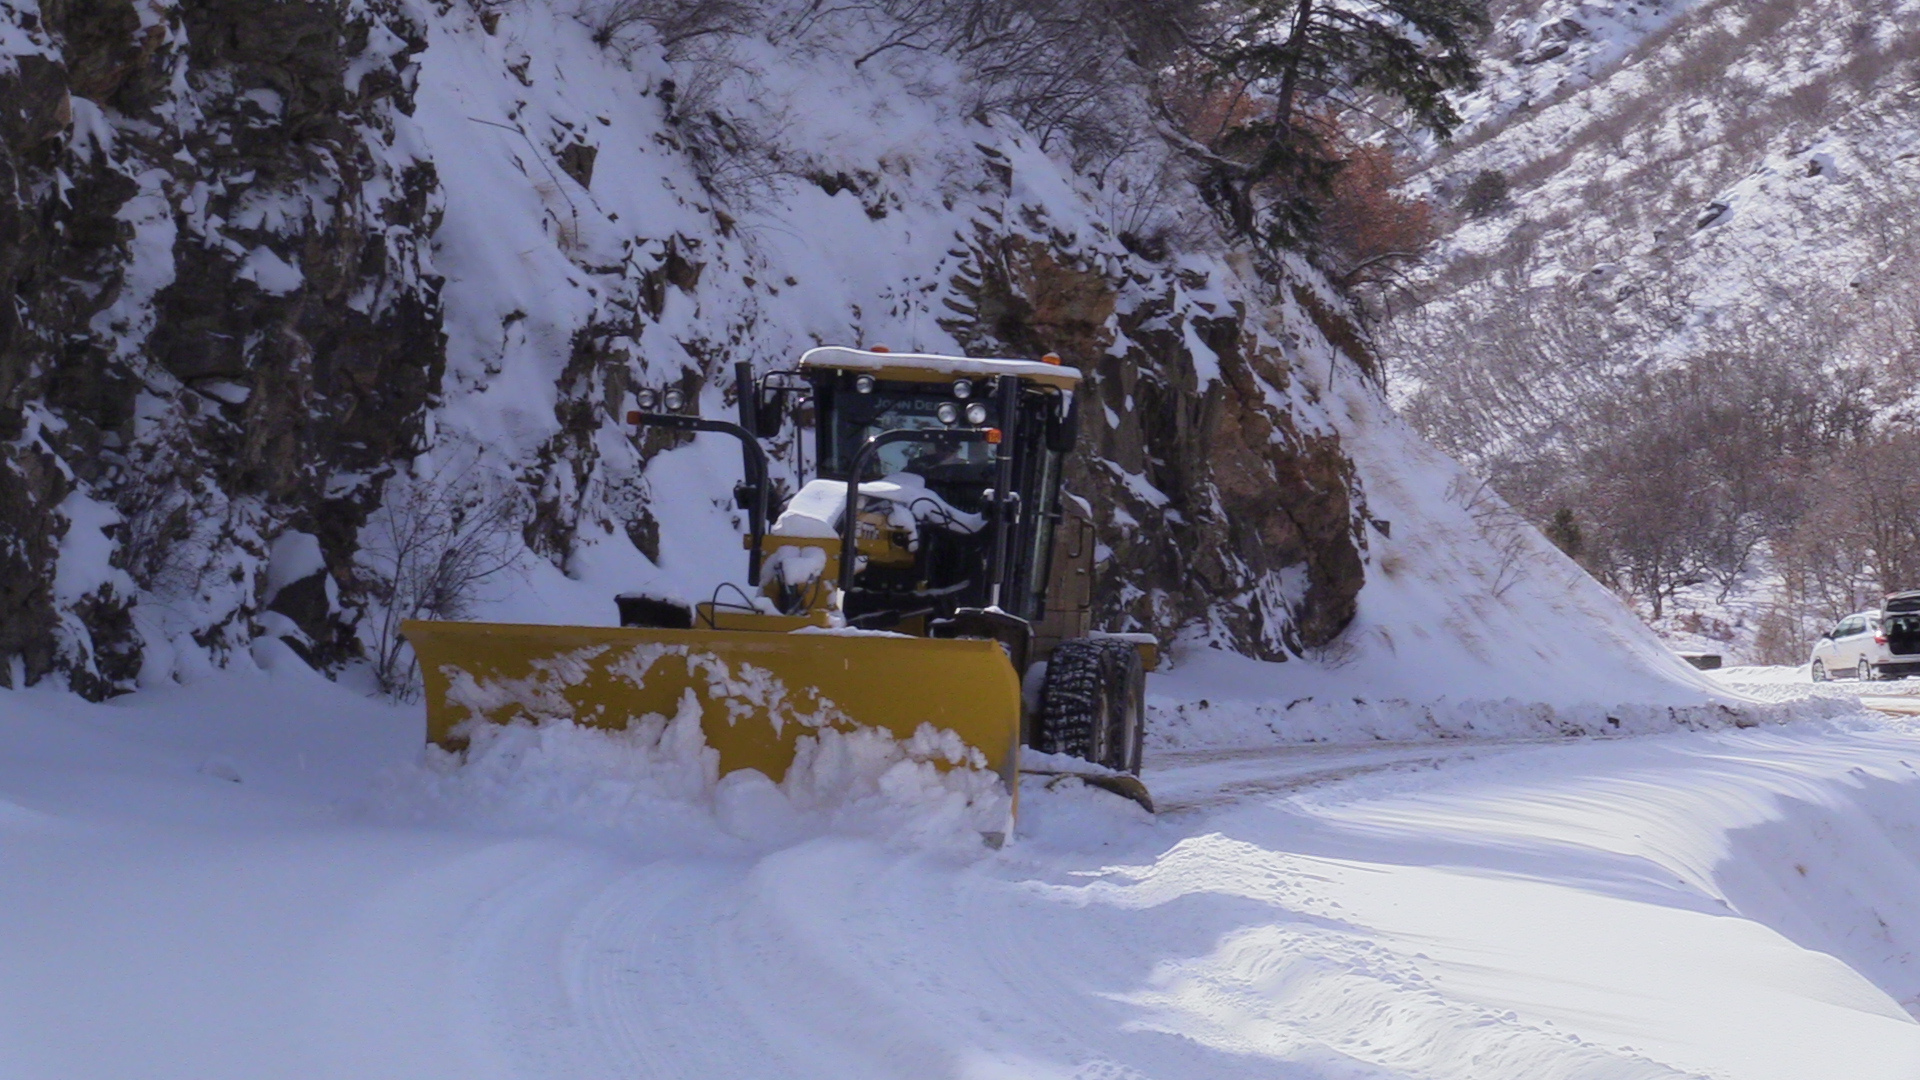 This is a picture of a road grader plowing snow in Waterton Canyon.